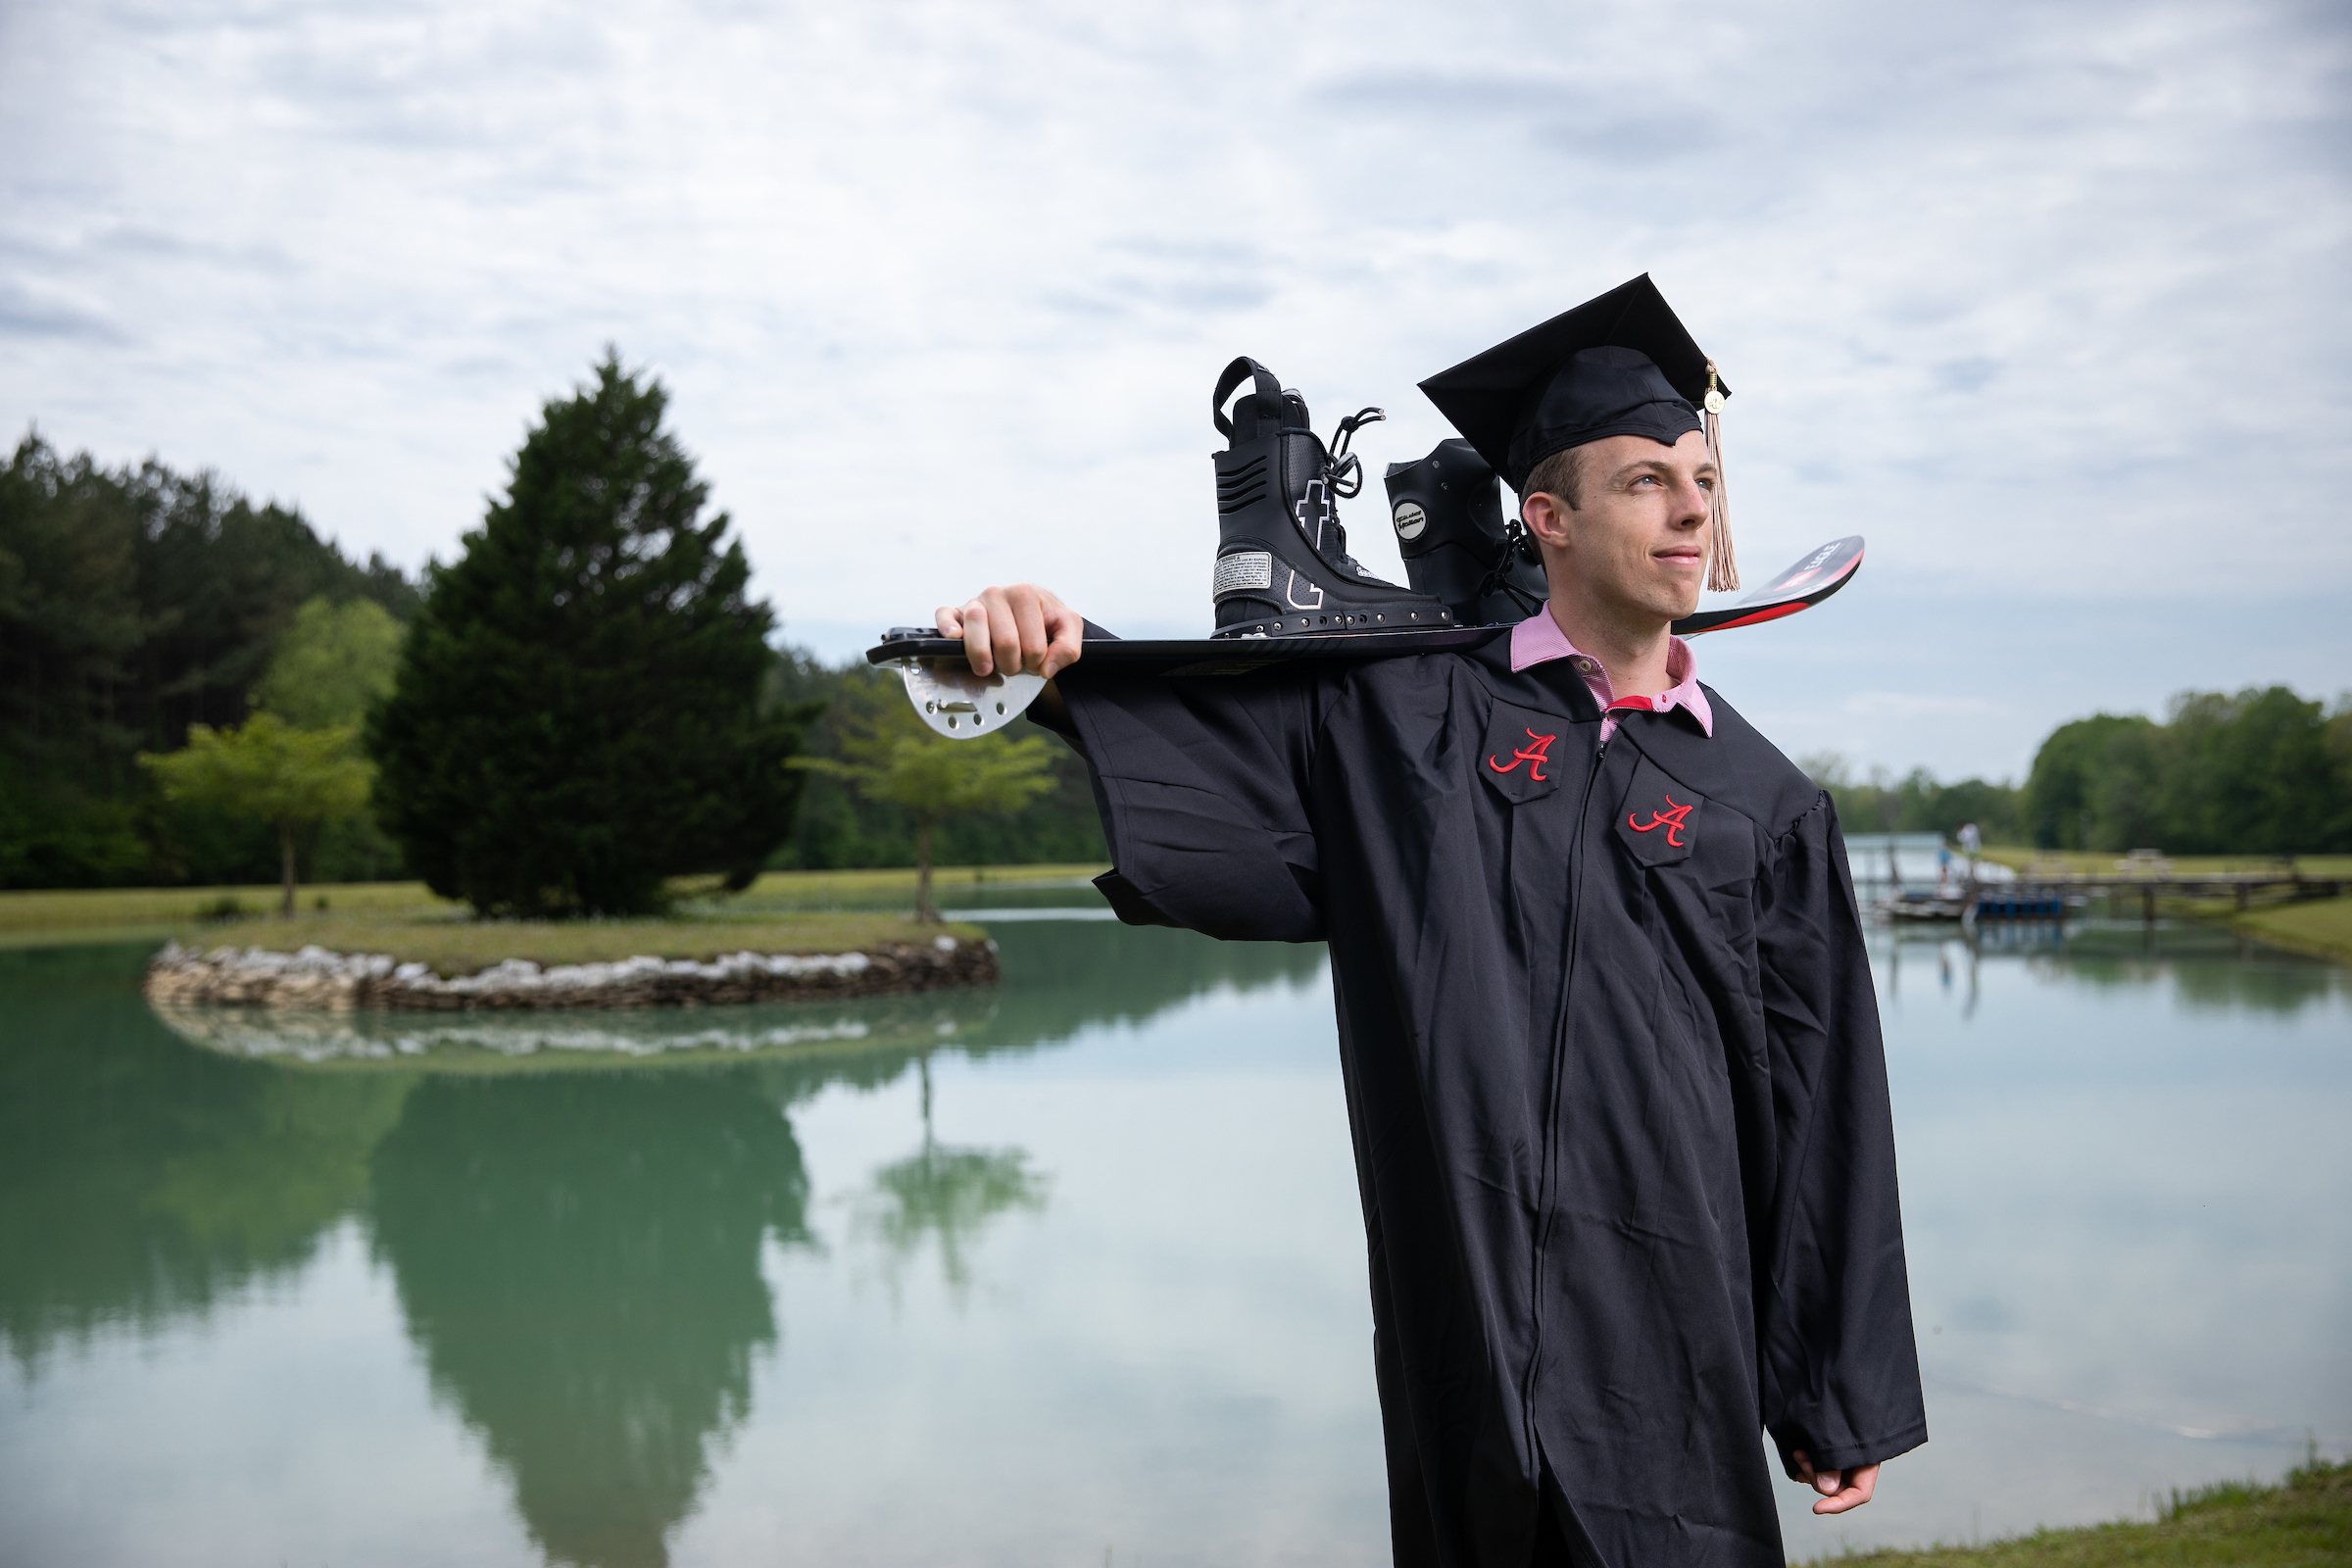 Sean Hunter posing in a graduation cap and gown while holding water skis over his shoulder